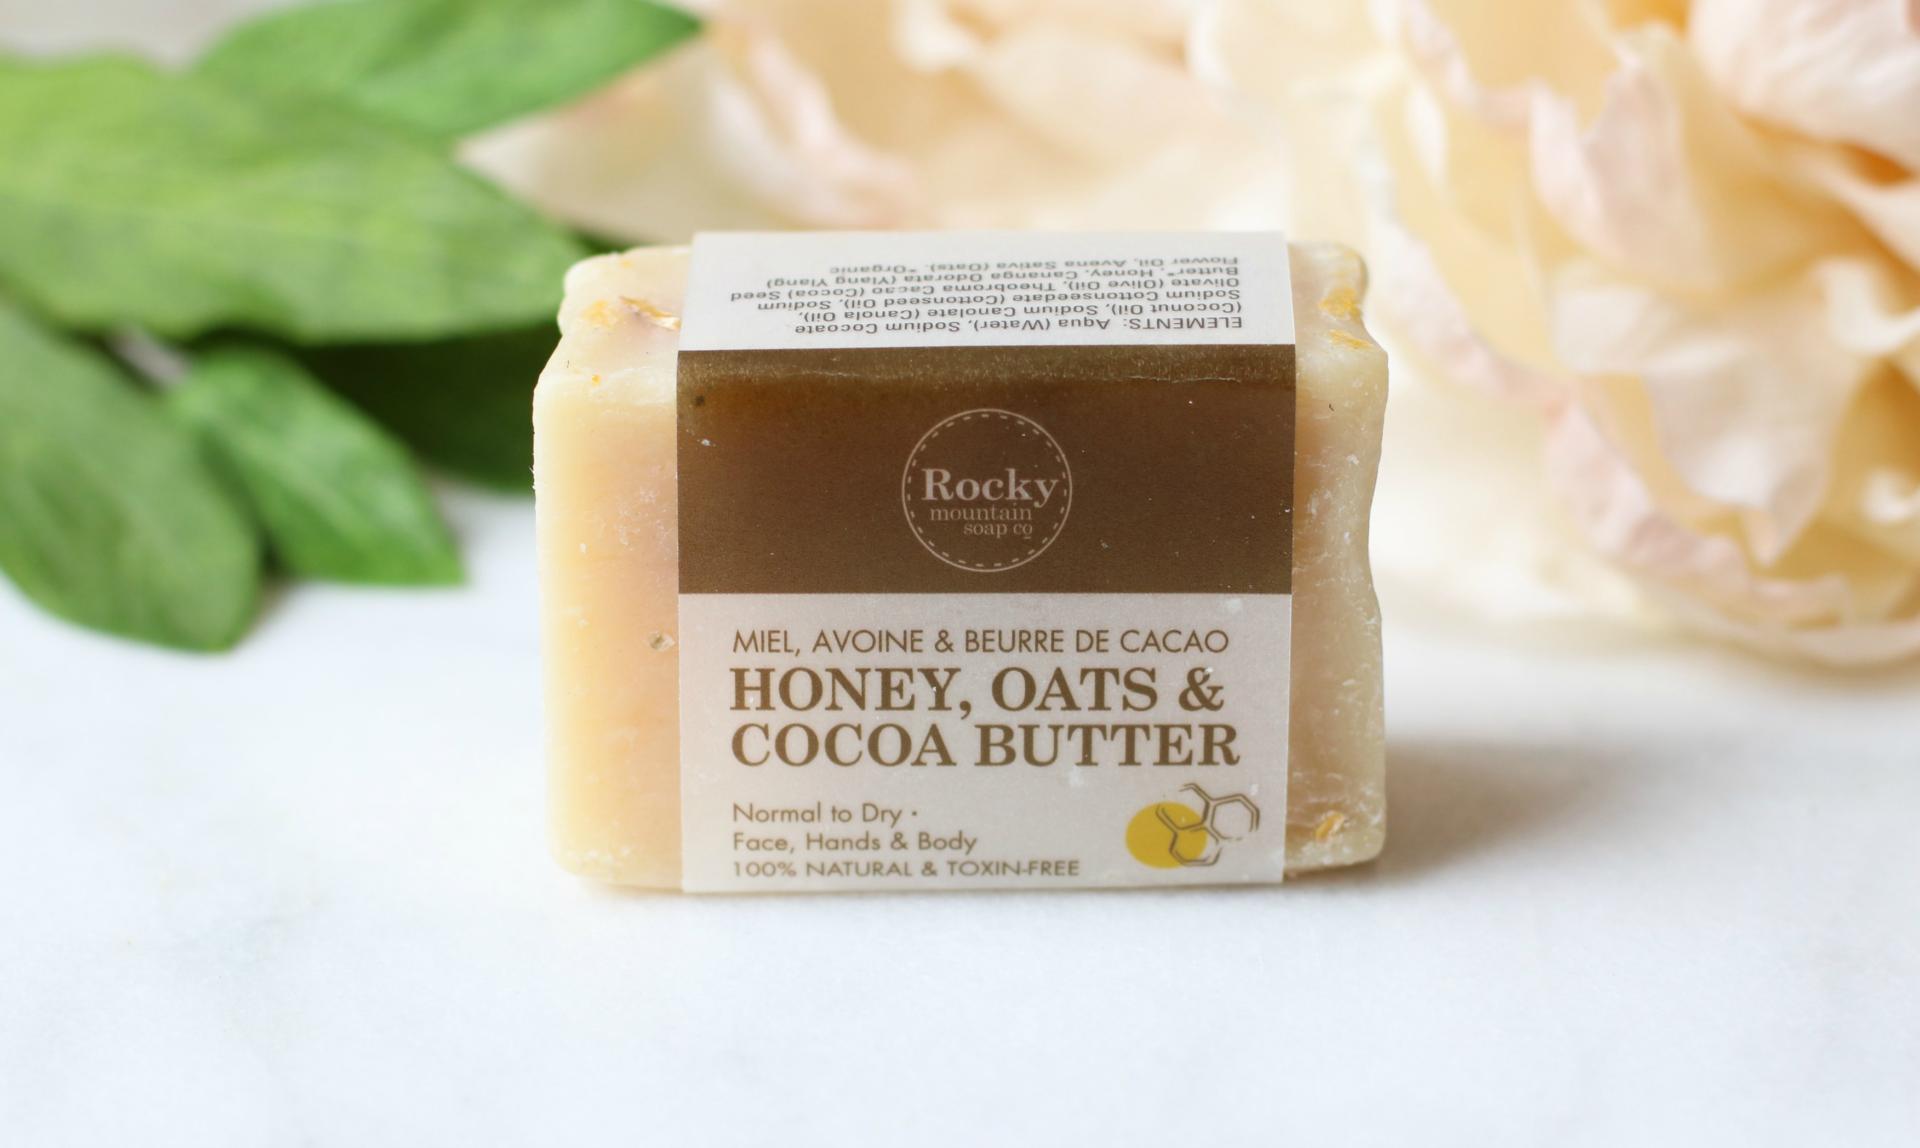 My review of Rocky Mountain Soap Company's 100% Natural Skin Care